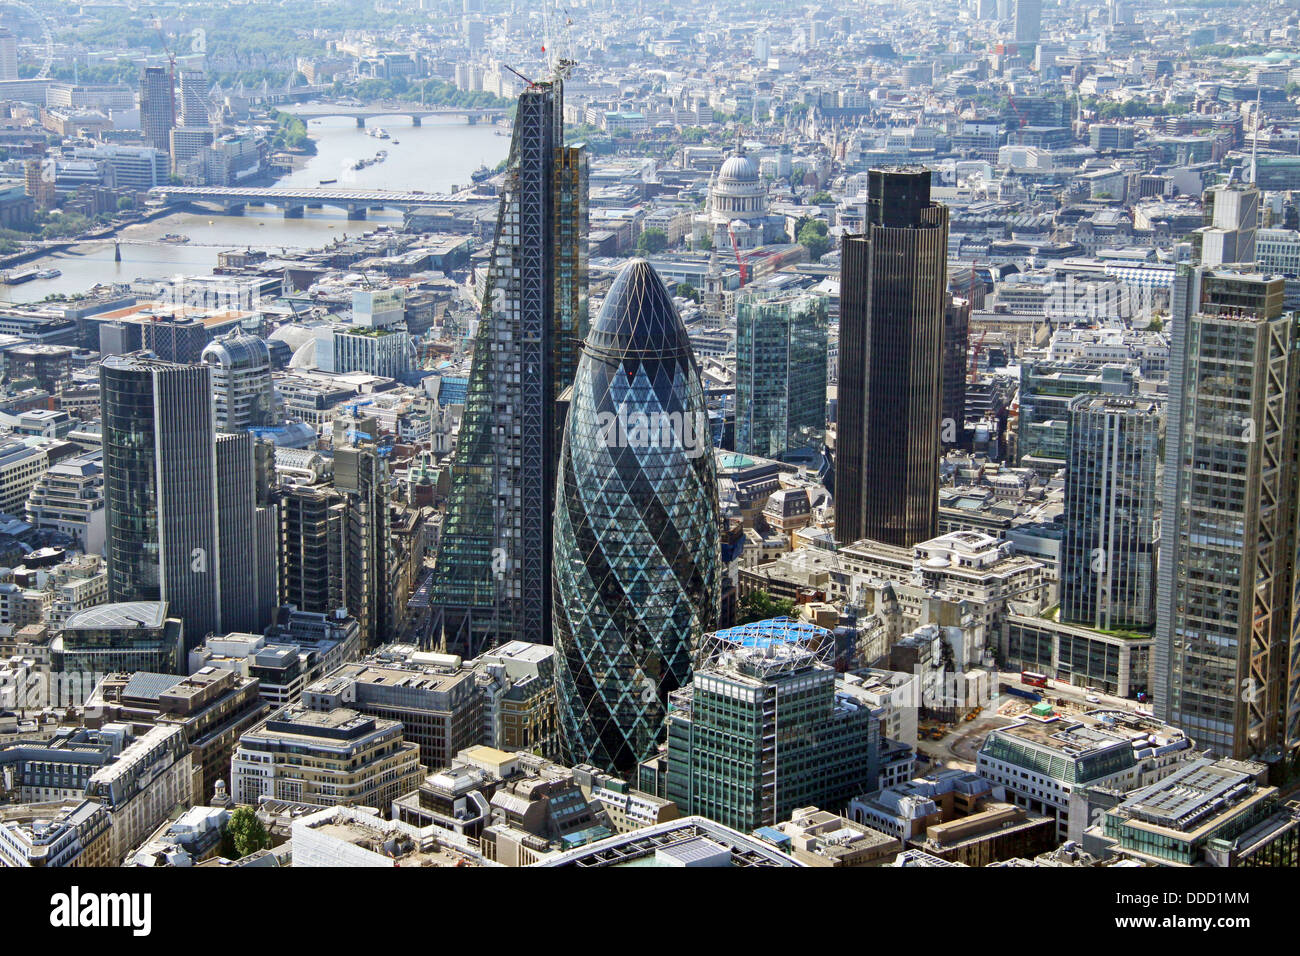 aerial view of the City of London, Gherkin, Cheese Grater and NatWest Tower plus the River Thames, business area Stock Photo